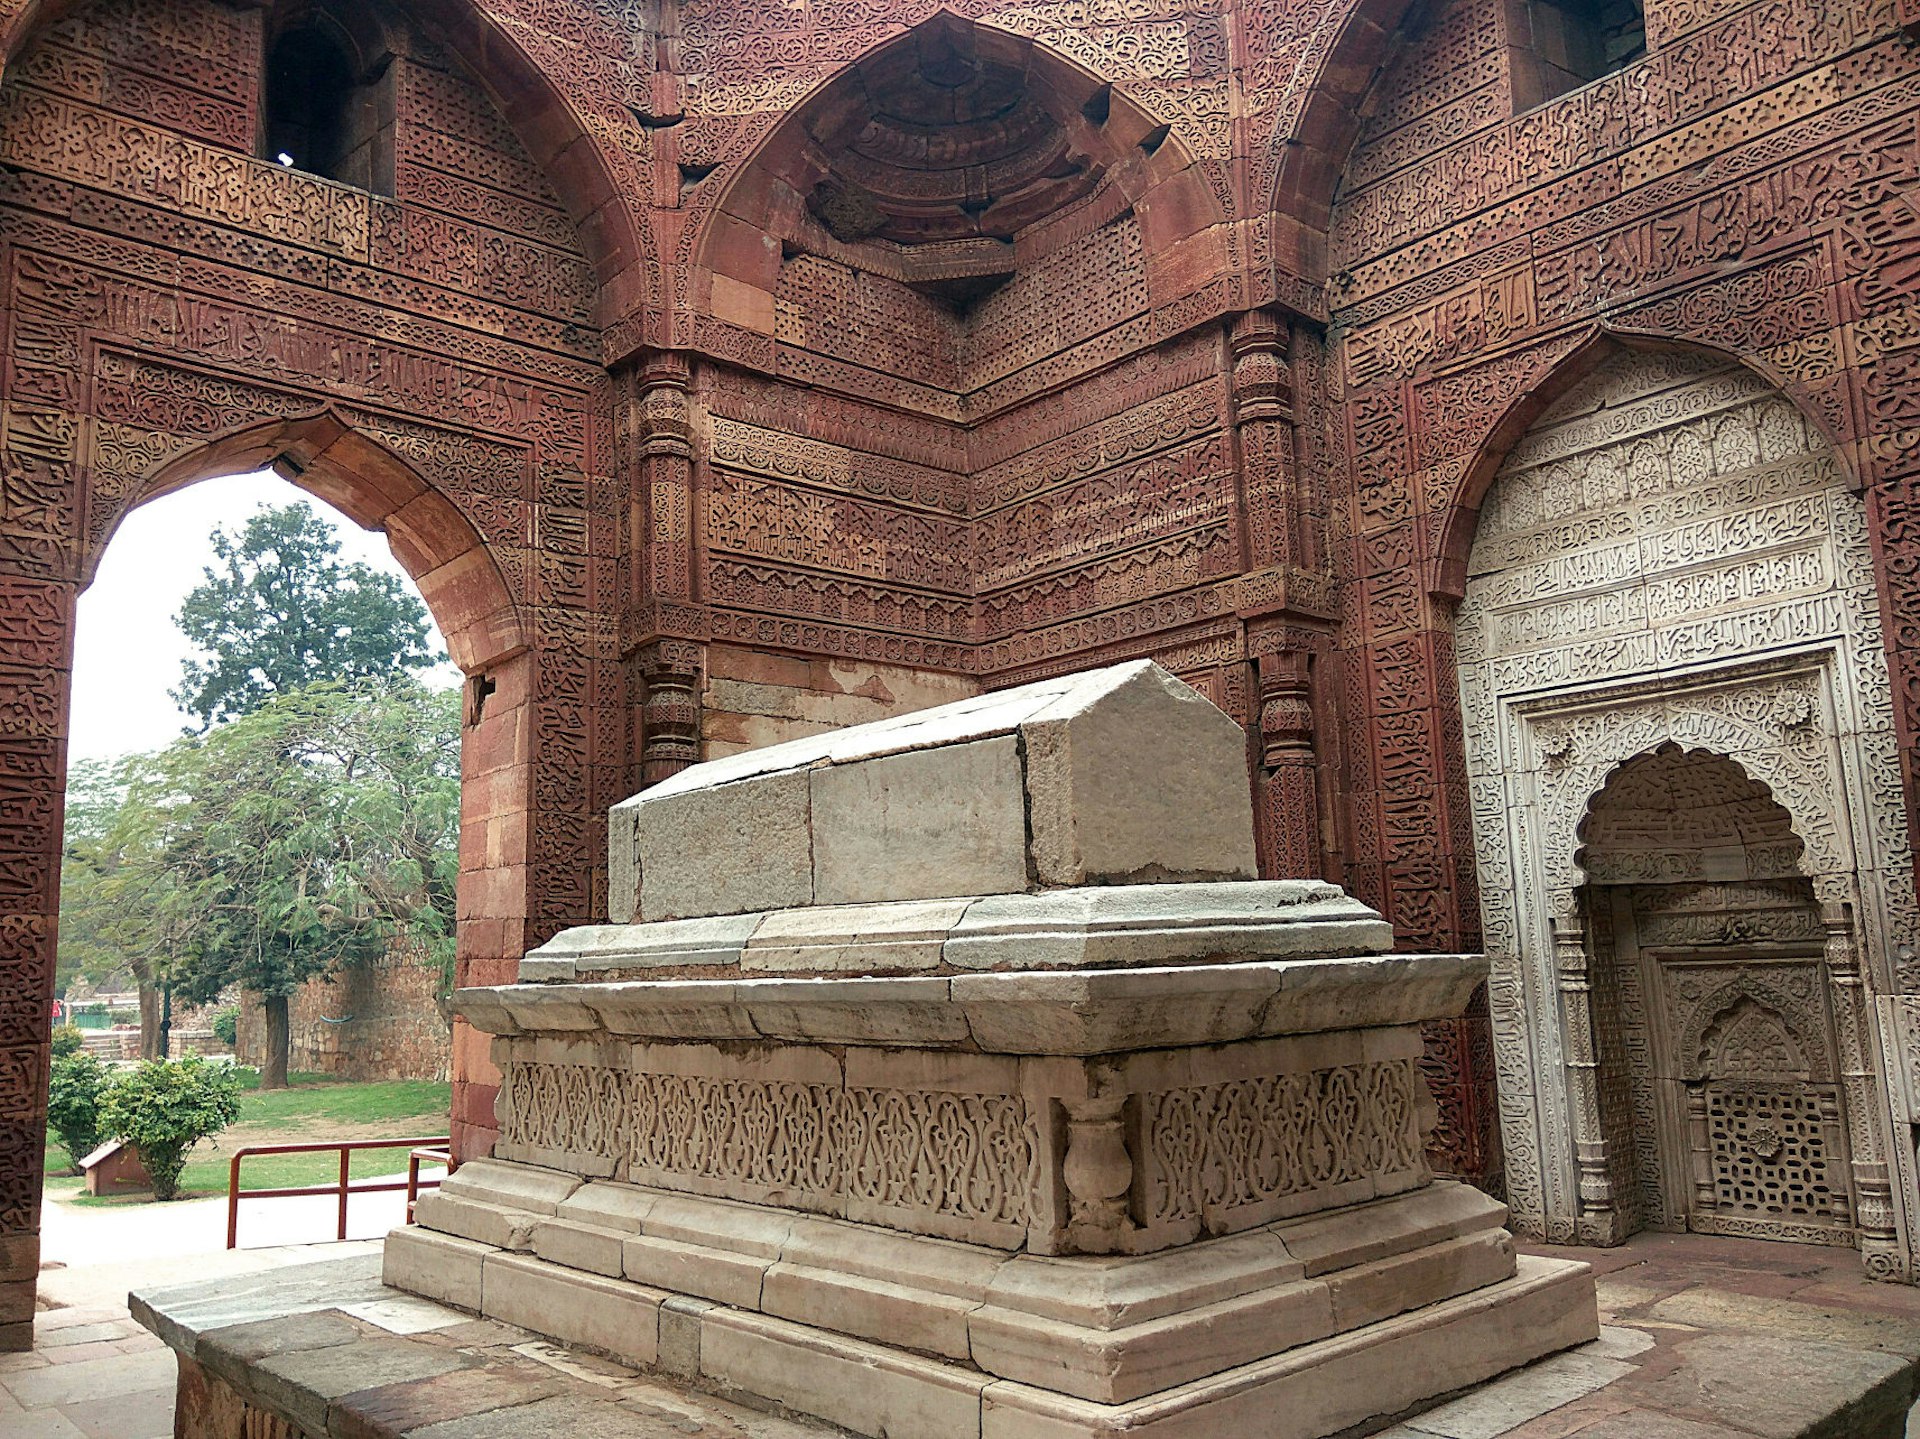  Tomb of Iltutmish emblazoned with Islamic script